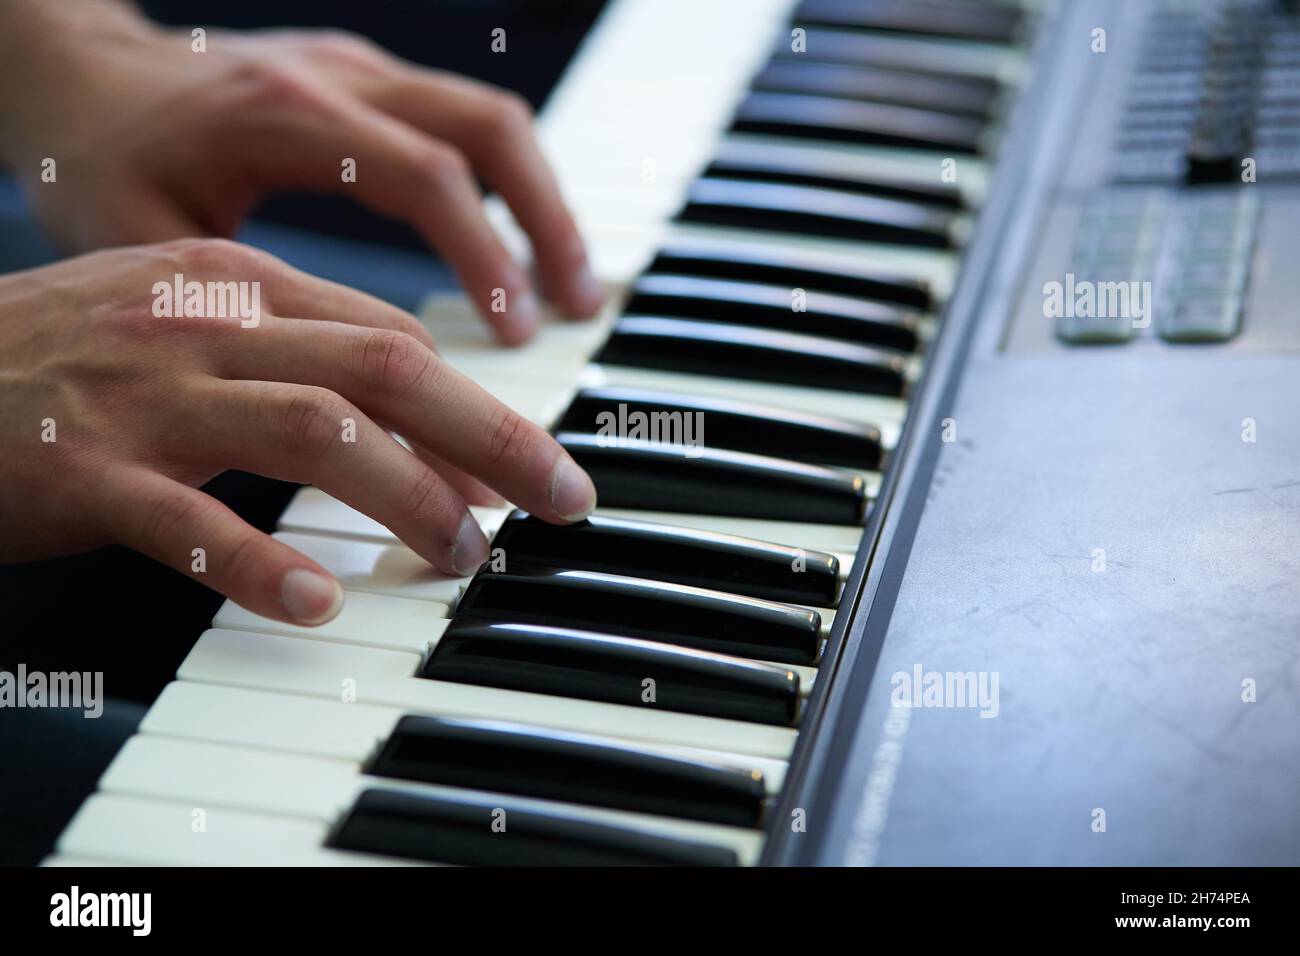 close-up detail of the pianist's fingers while playing his piano softly Stock Photo